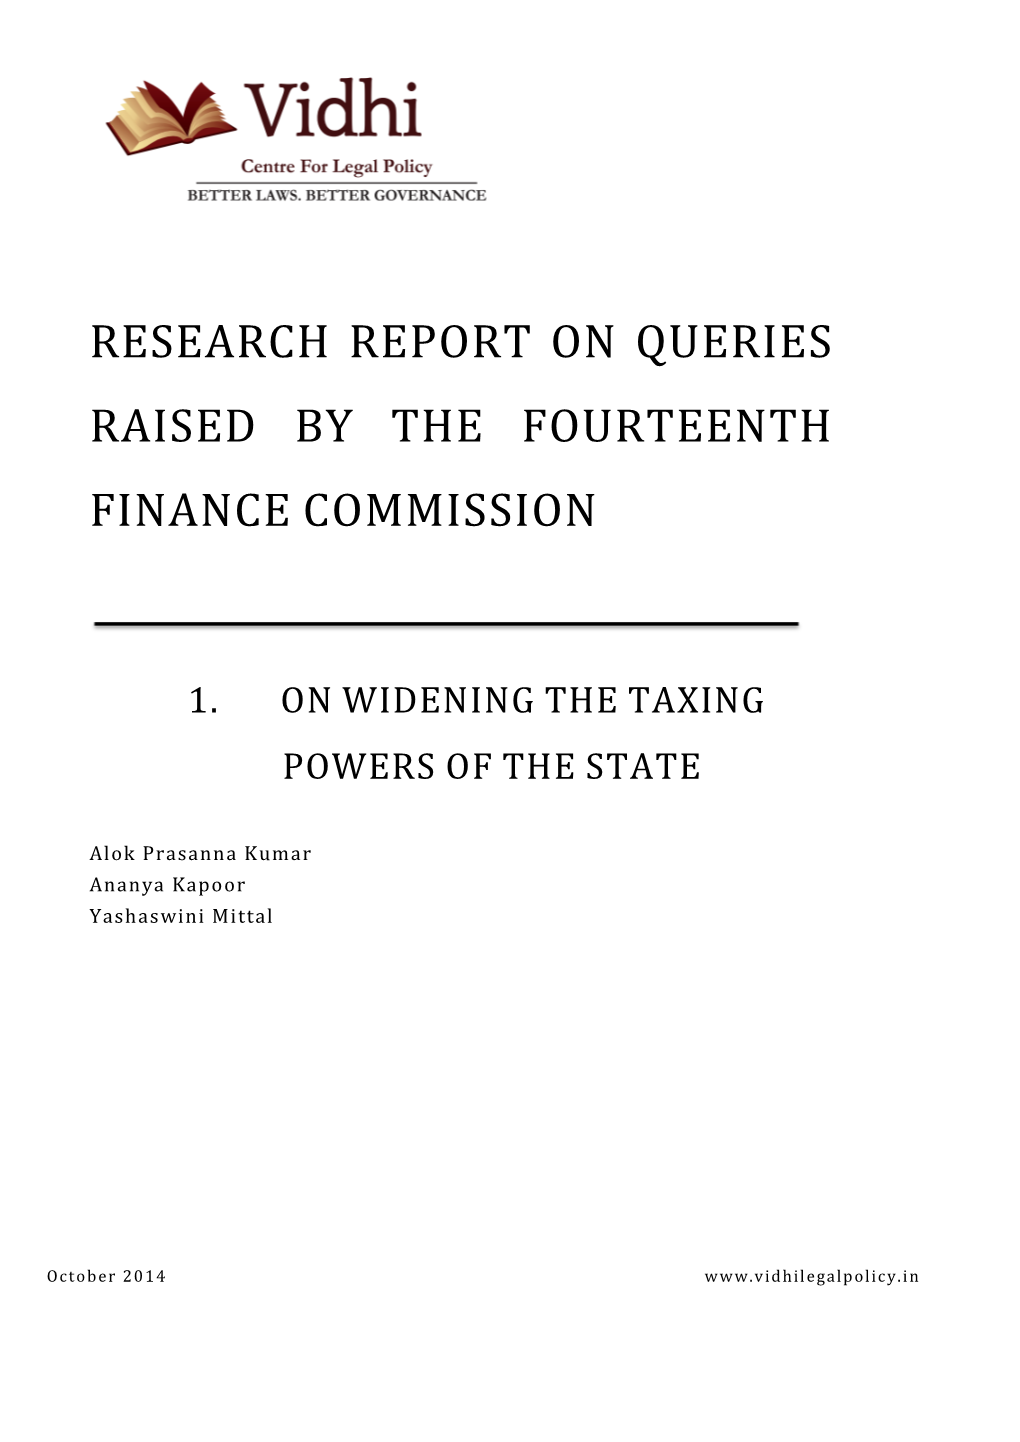 Research Report on Queries Raised by the Fourteenth